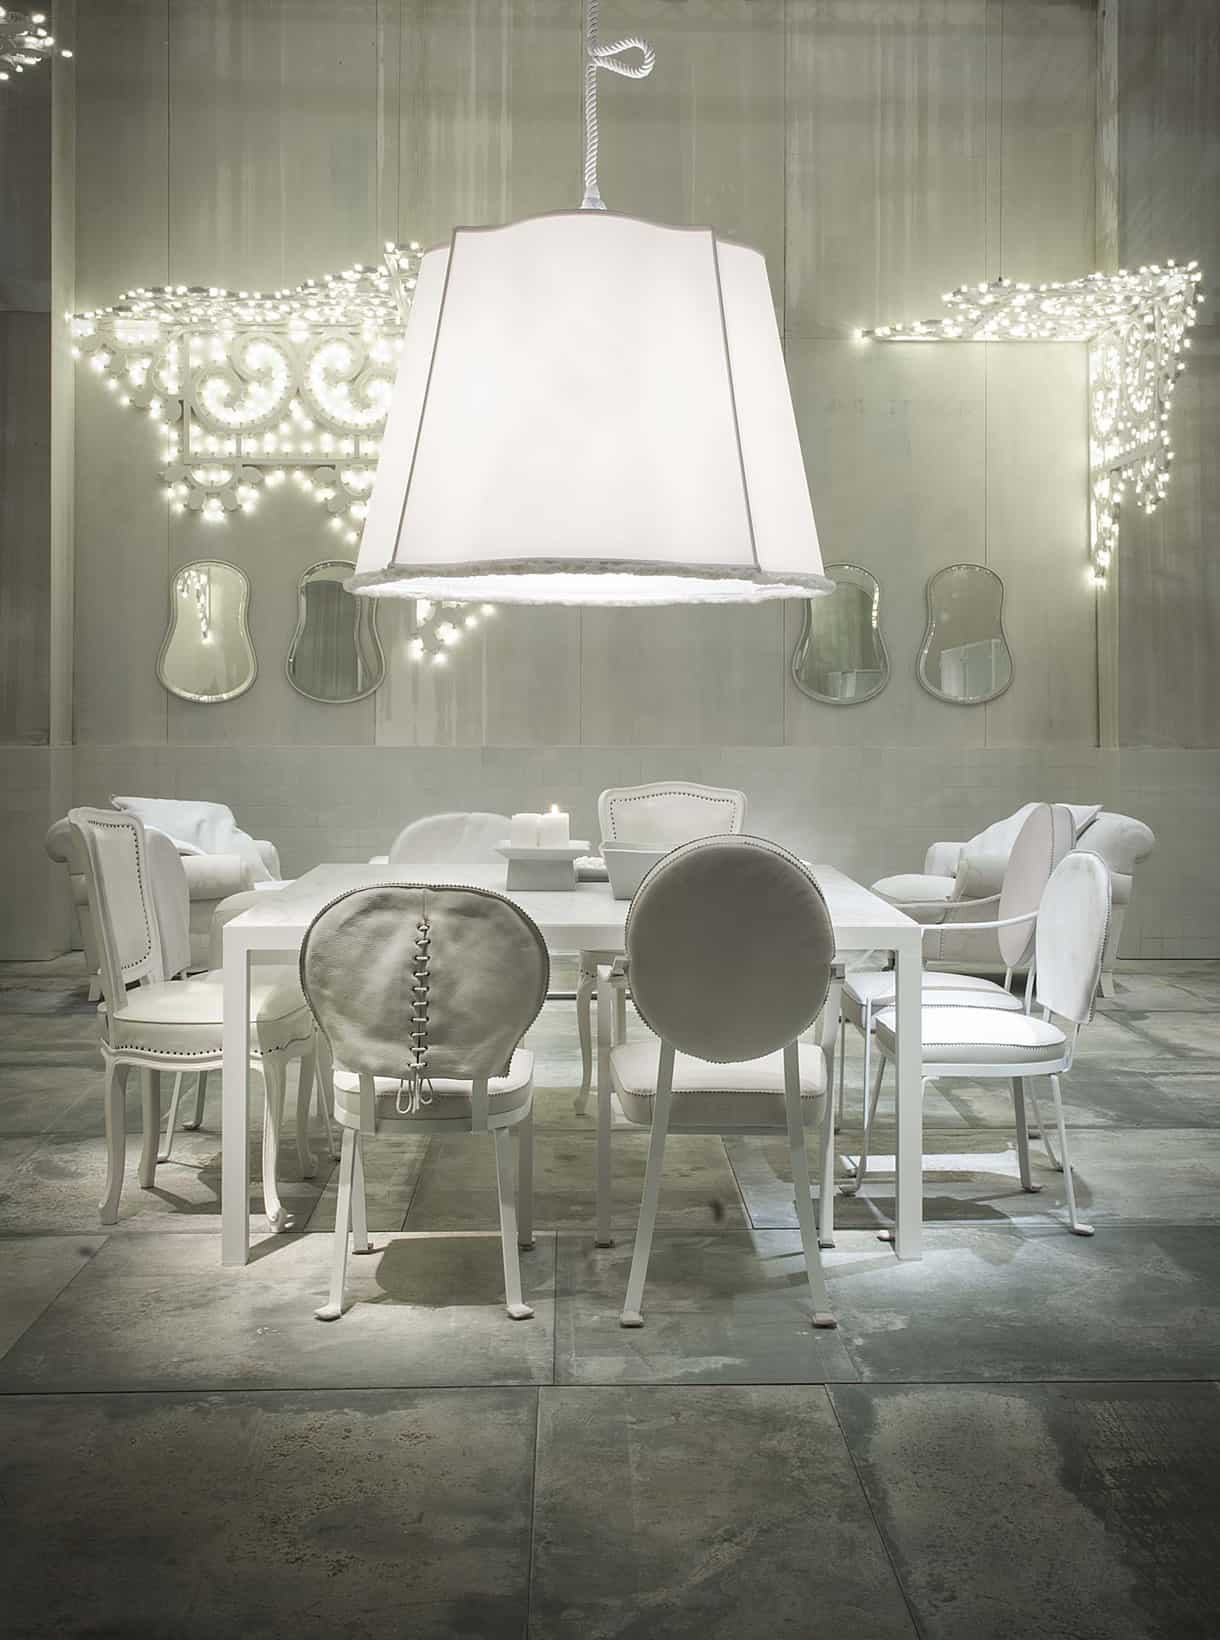 paola navone designs white fairy tale interiors latest furniture baxter 2